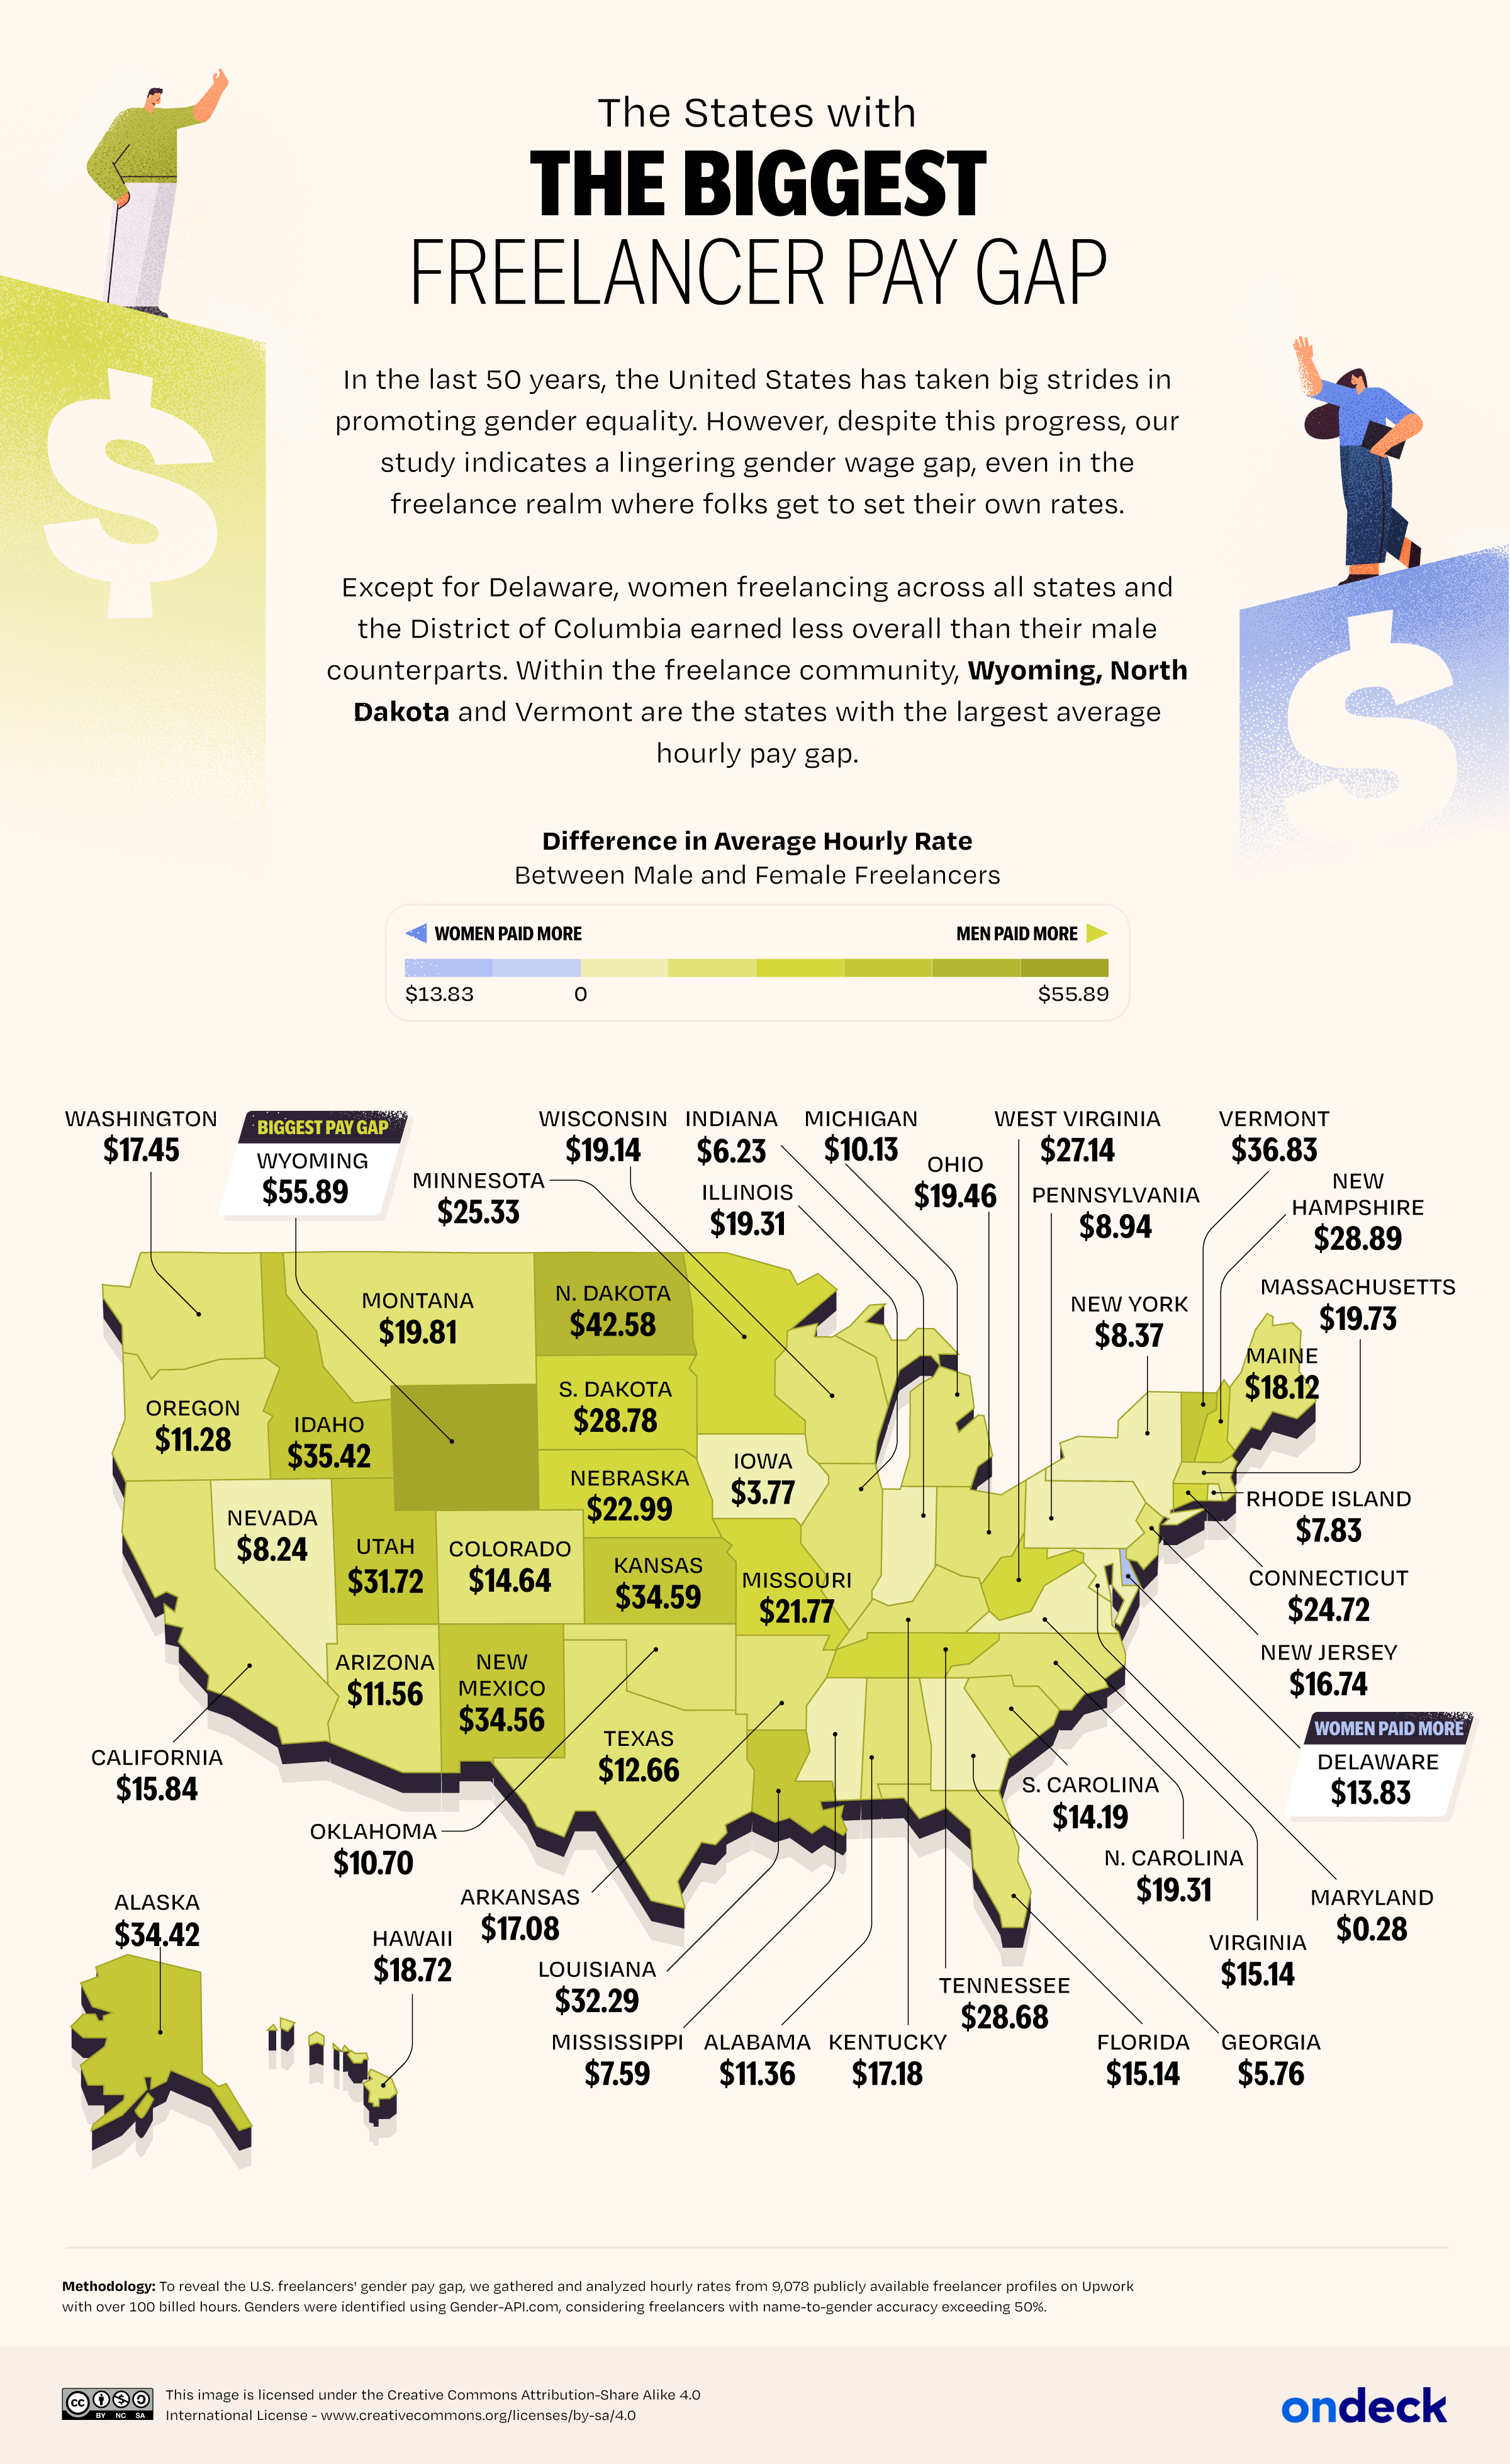 U.S. map showing the states with the biggest freelancer pay gap